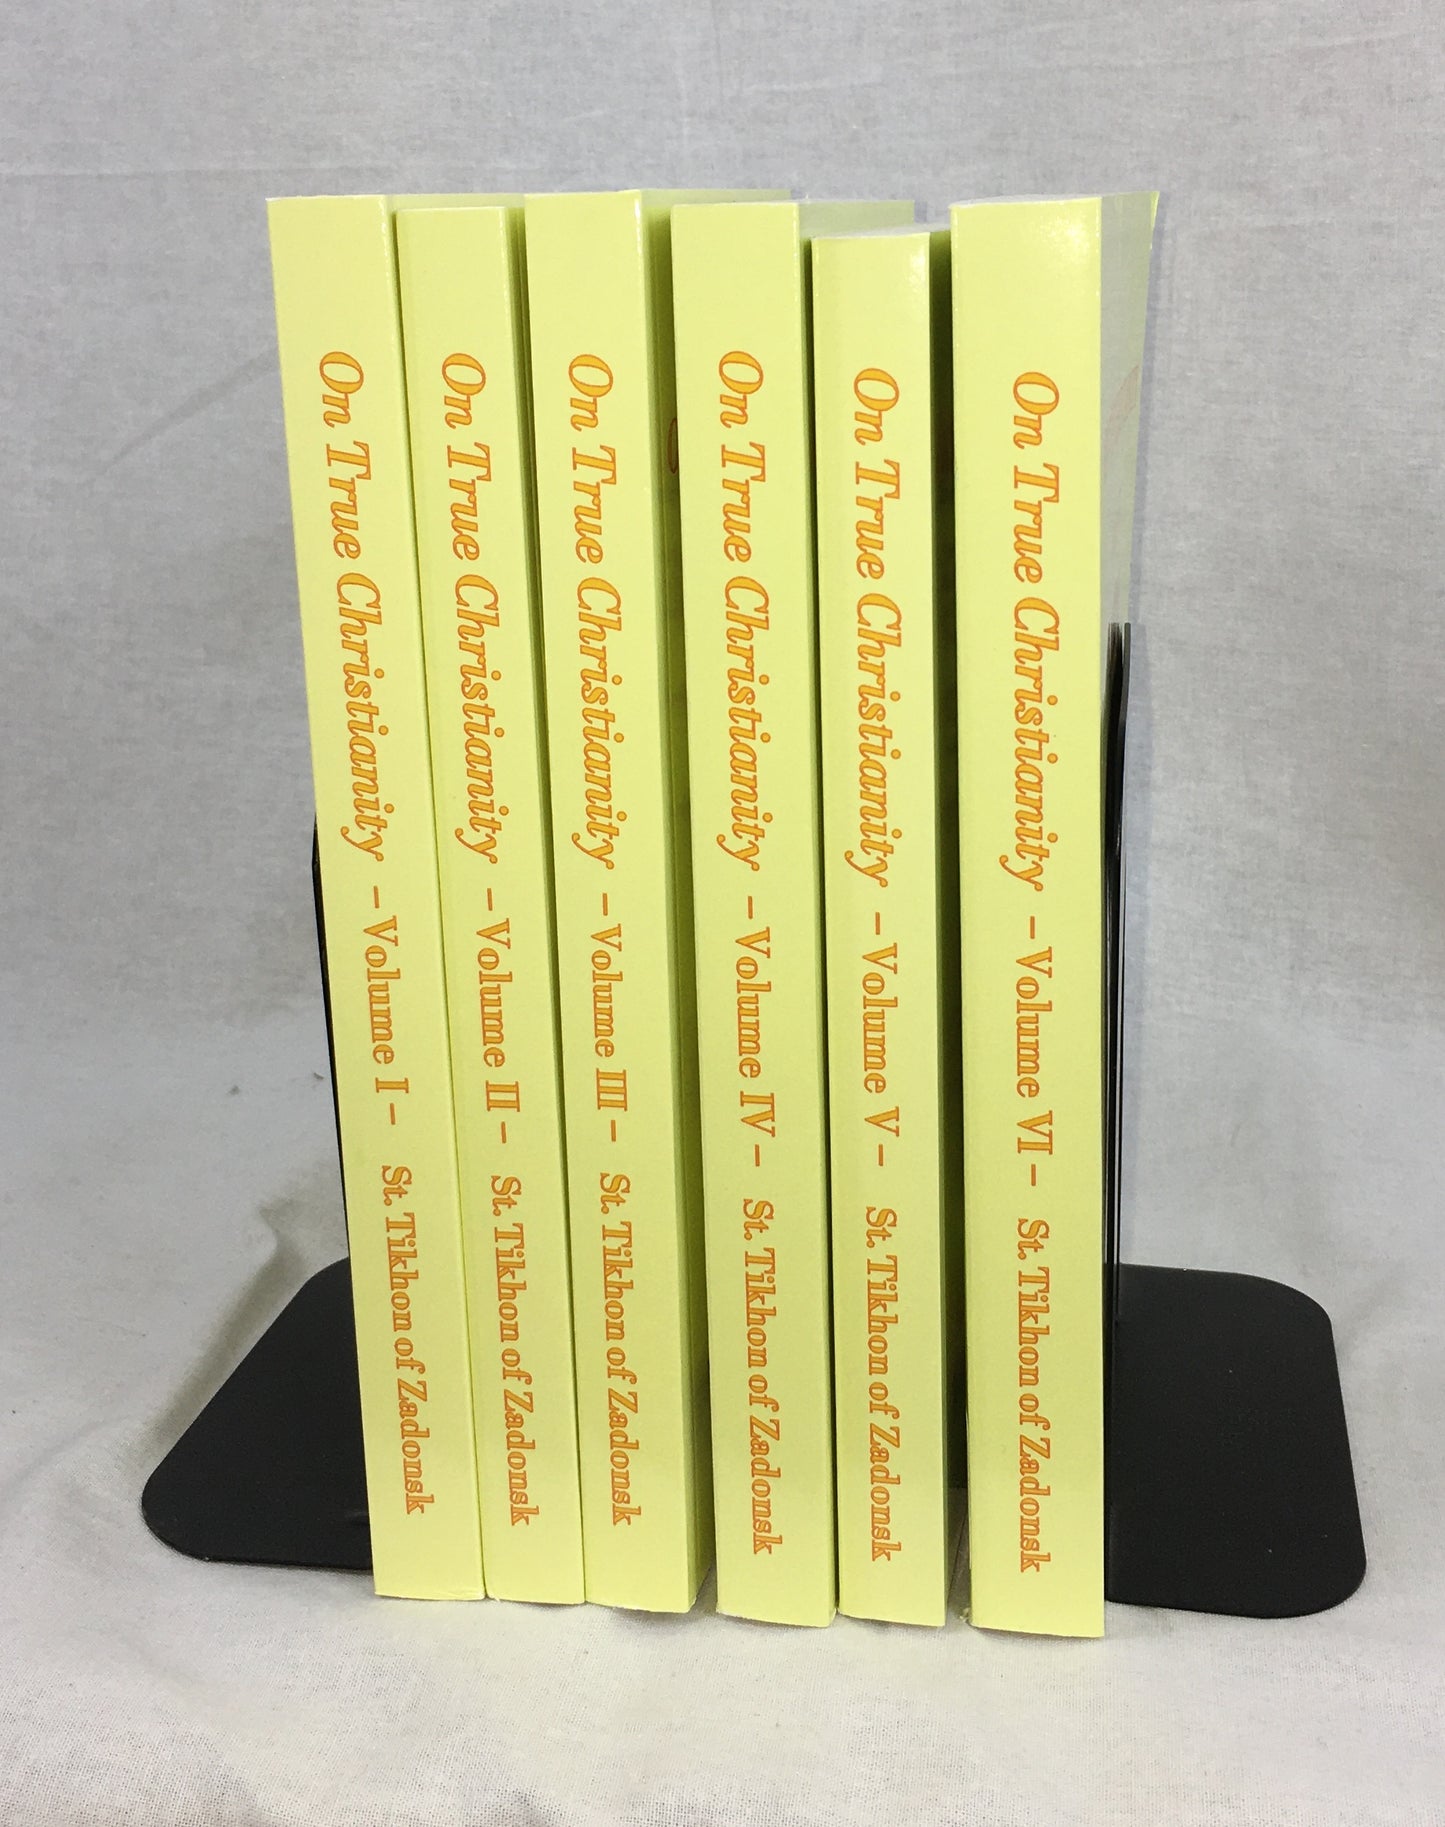 On True Christianity (Complete Set - 6 volumes)